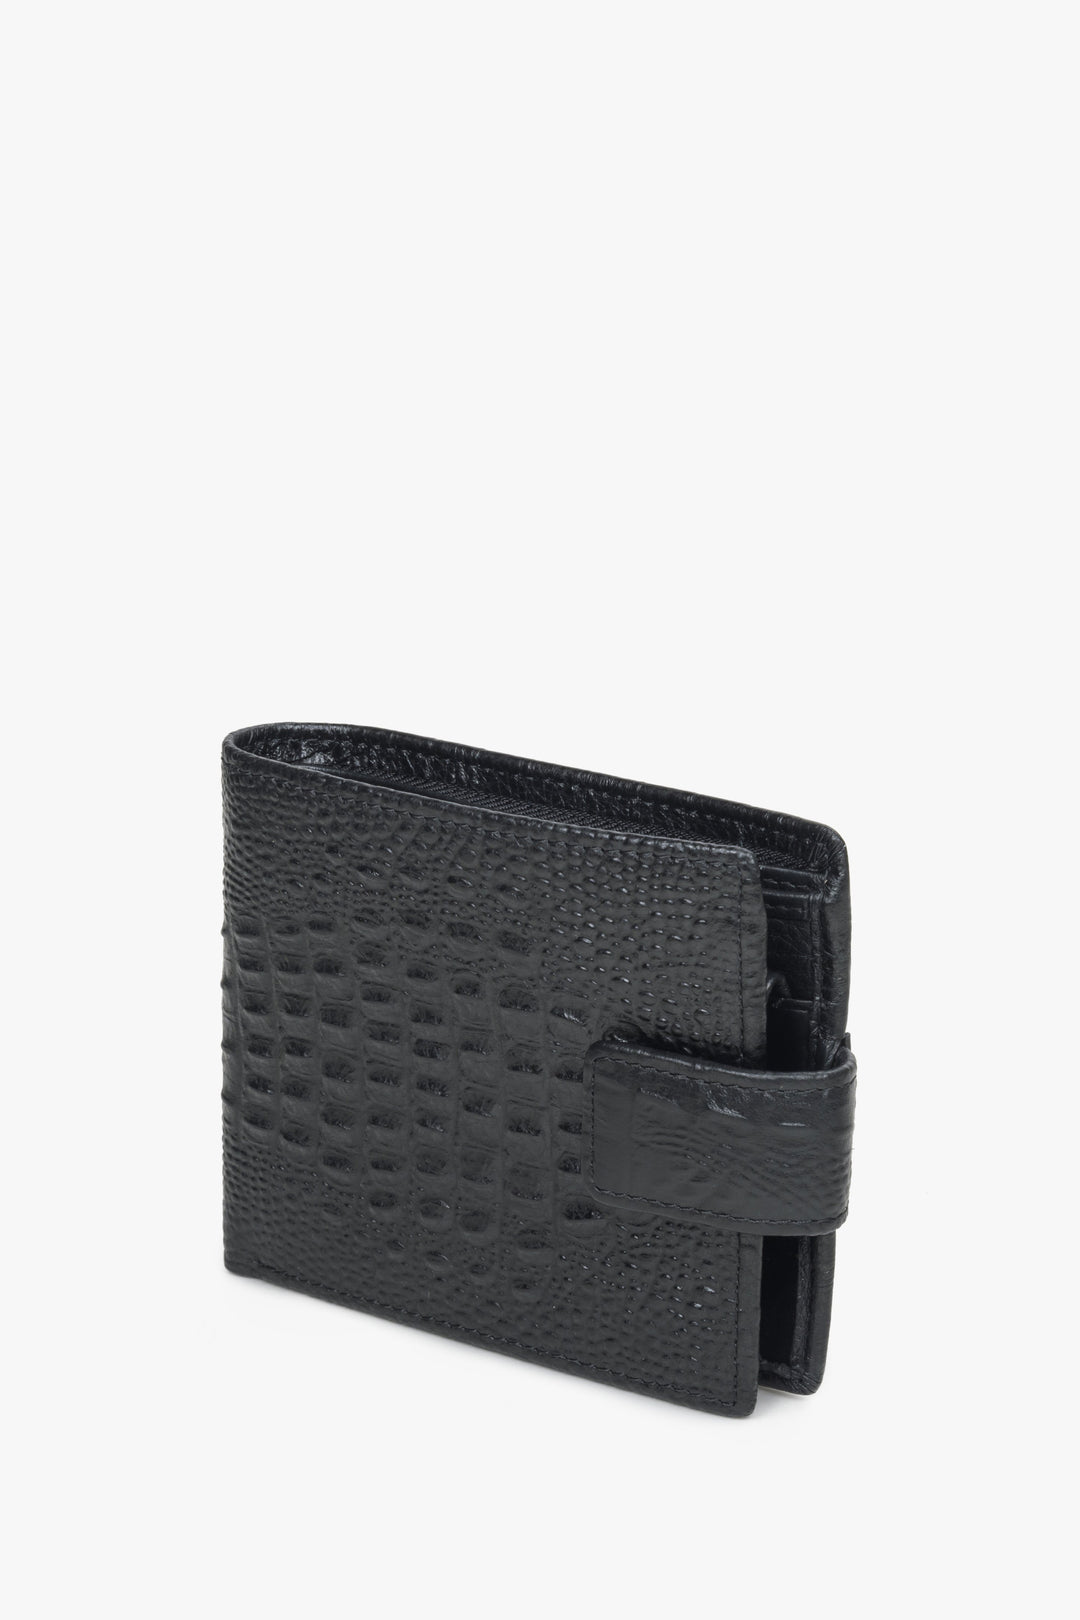 Men's black wallet with a clasp made of embossed genuine leather by Estro.